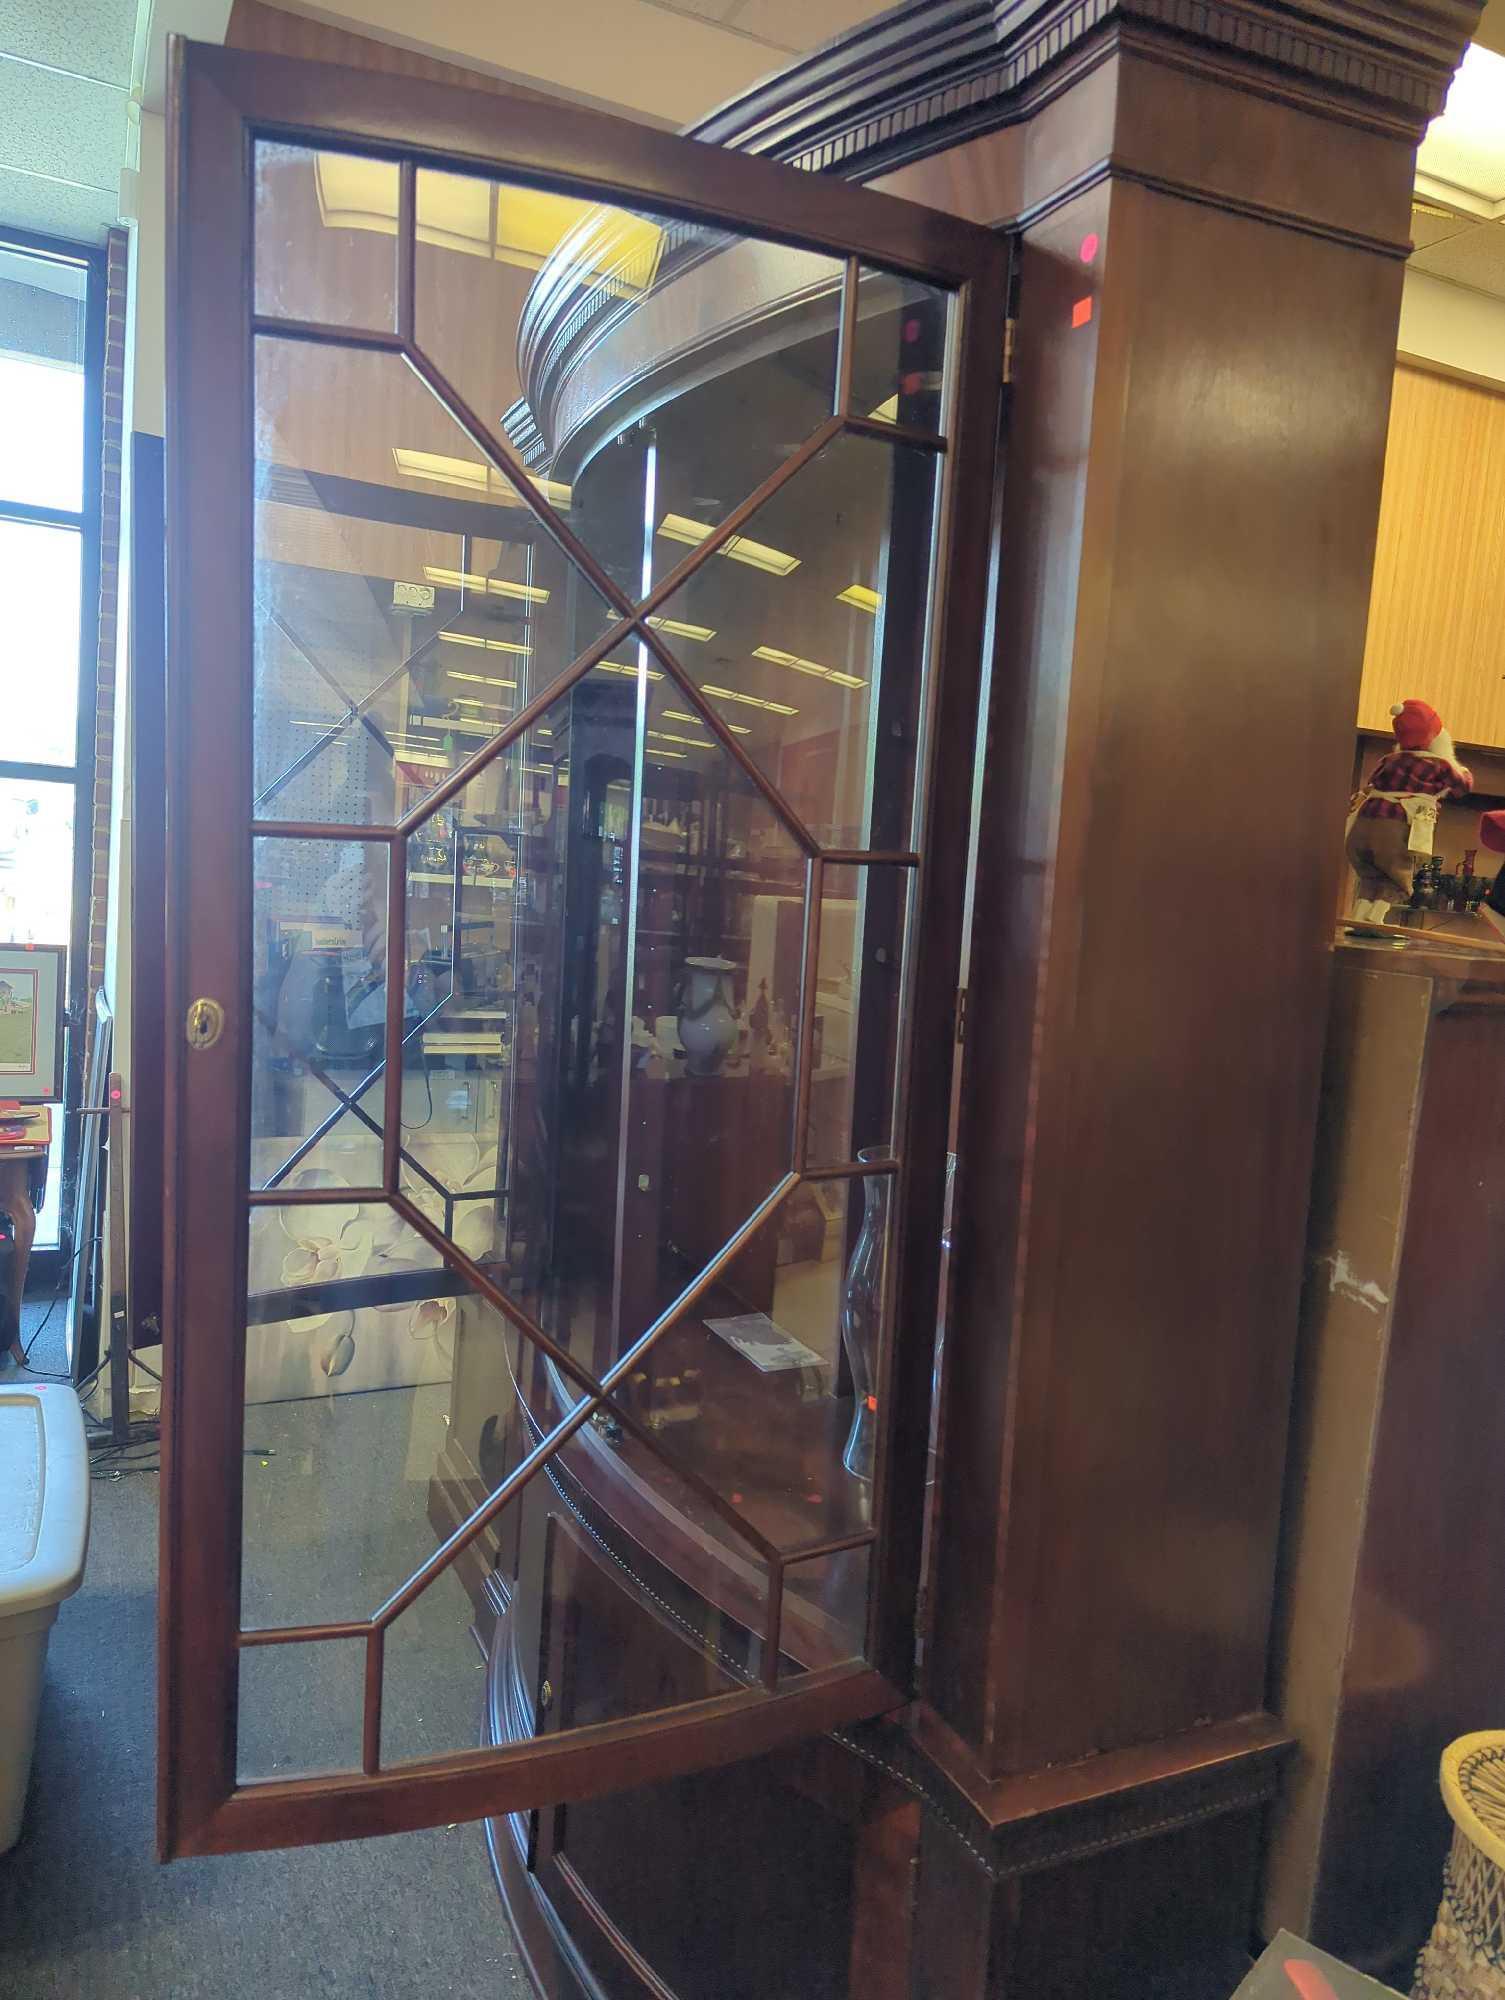 (Bring Help with This Item) Baker China Cabinet Breakfront Bookcase Palace Curved Glass, Missing